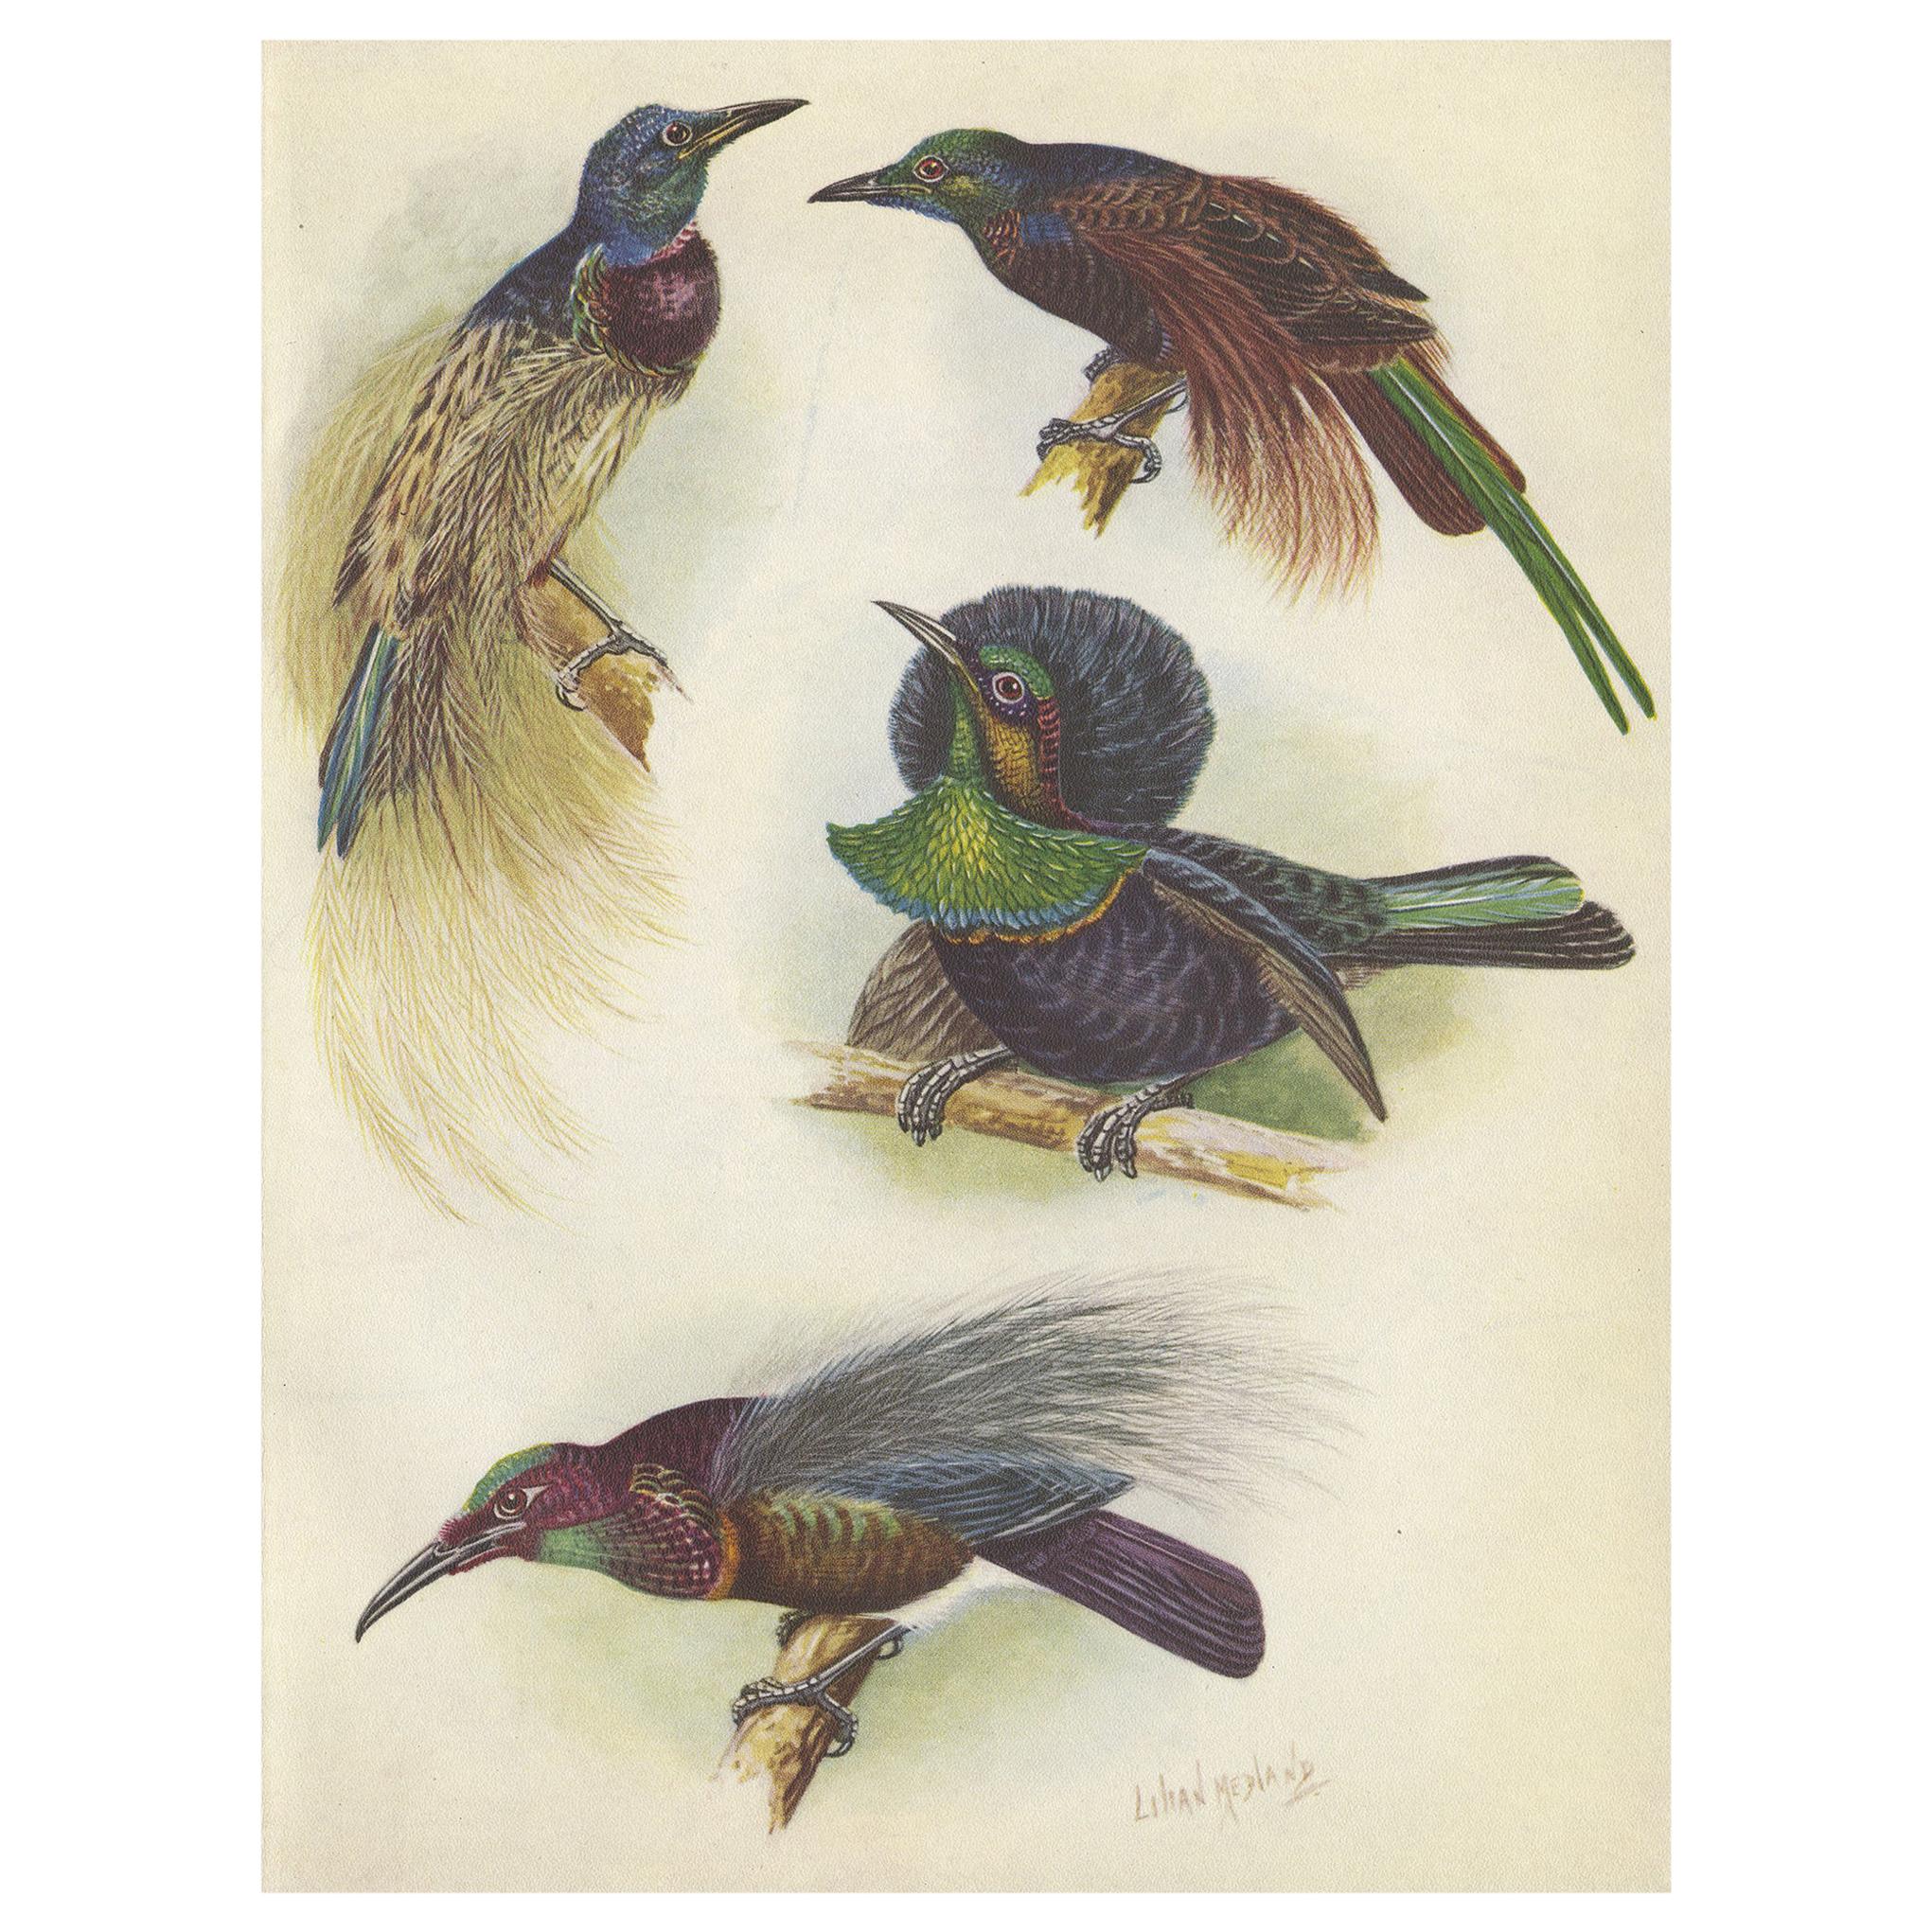 Antique Print of the Bensbach's Rifle Bird and Others, 1950 For Sale